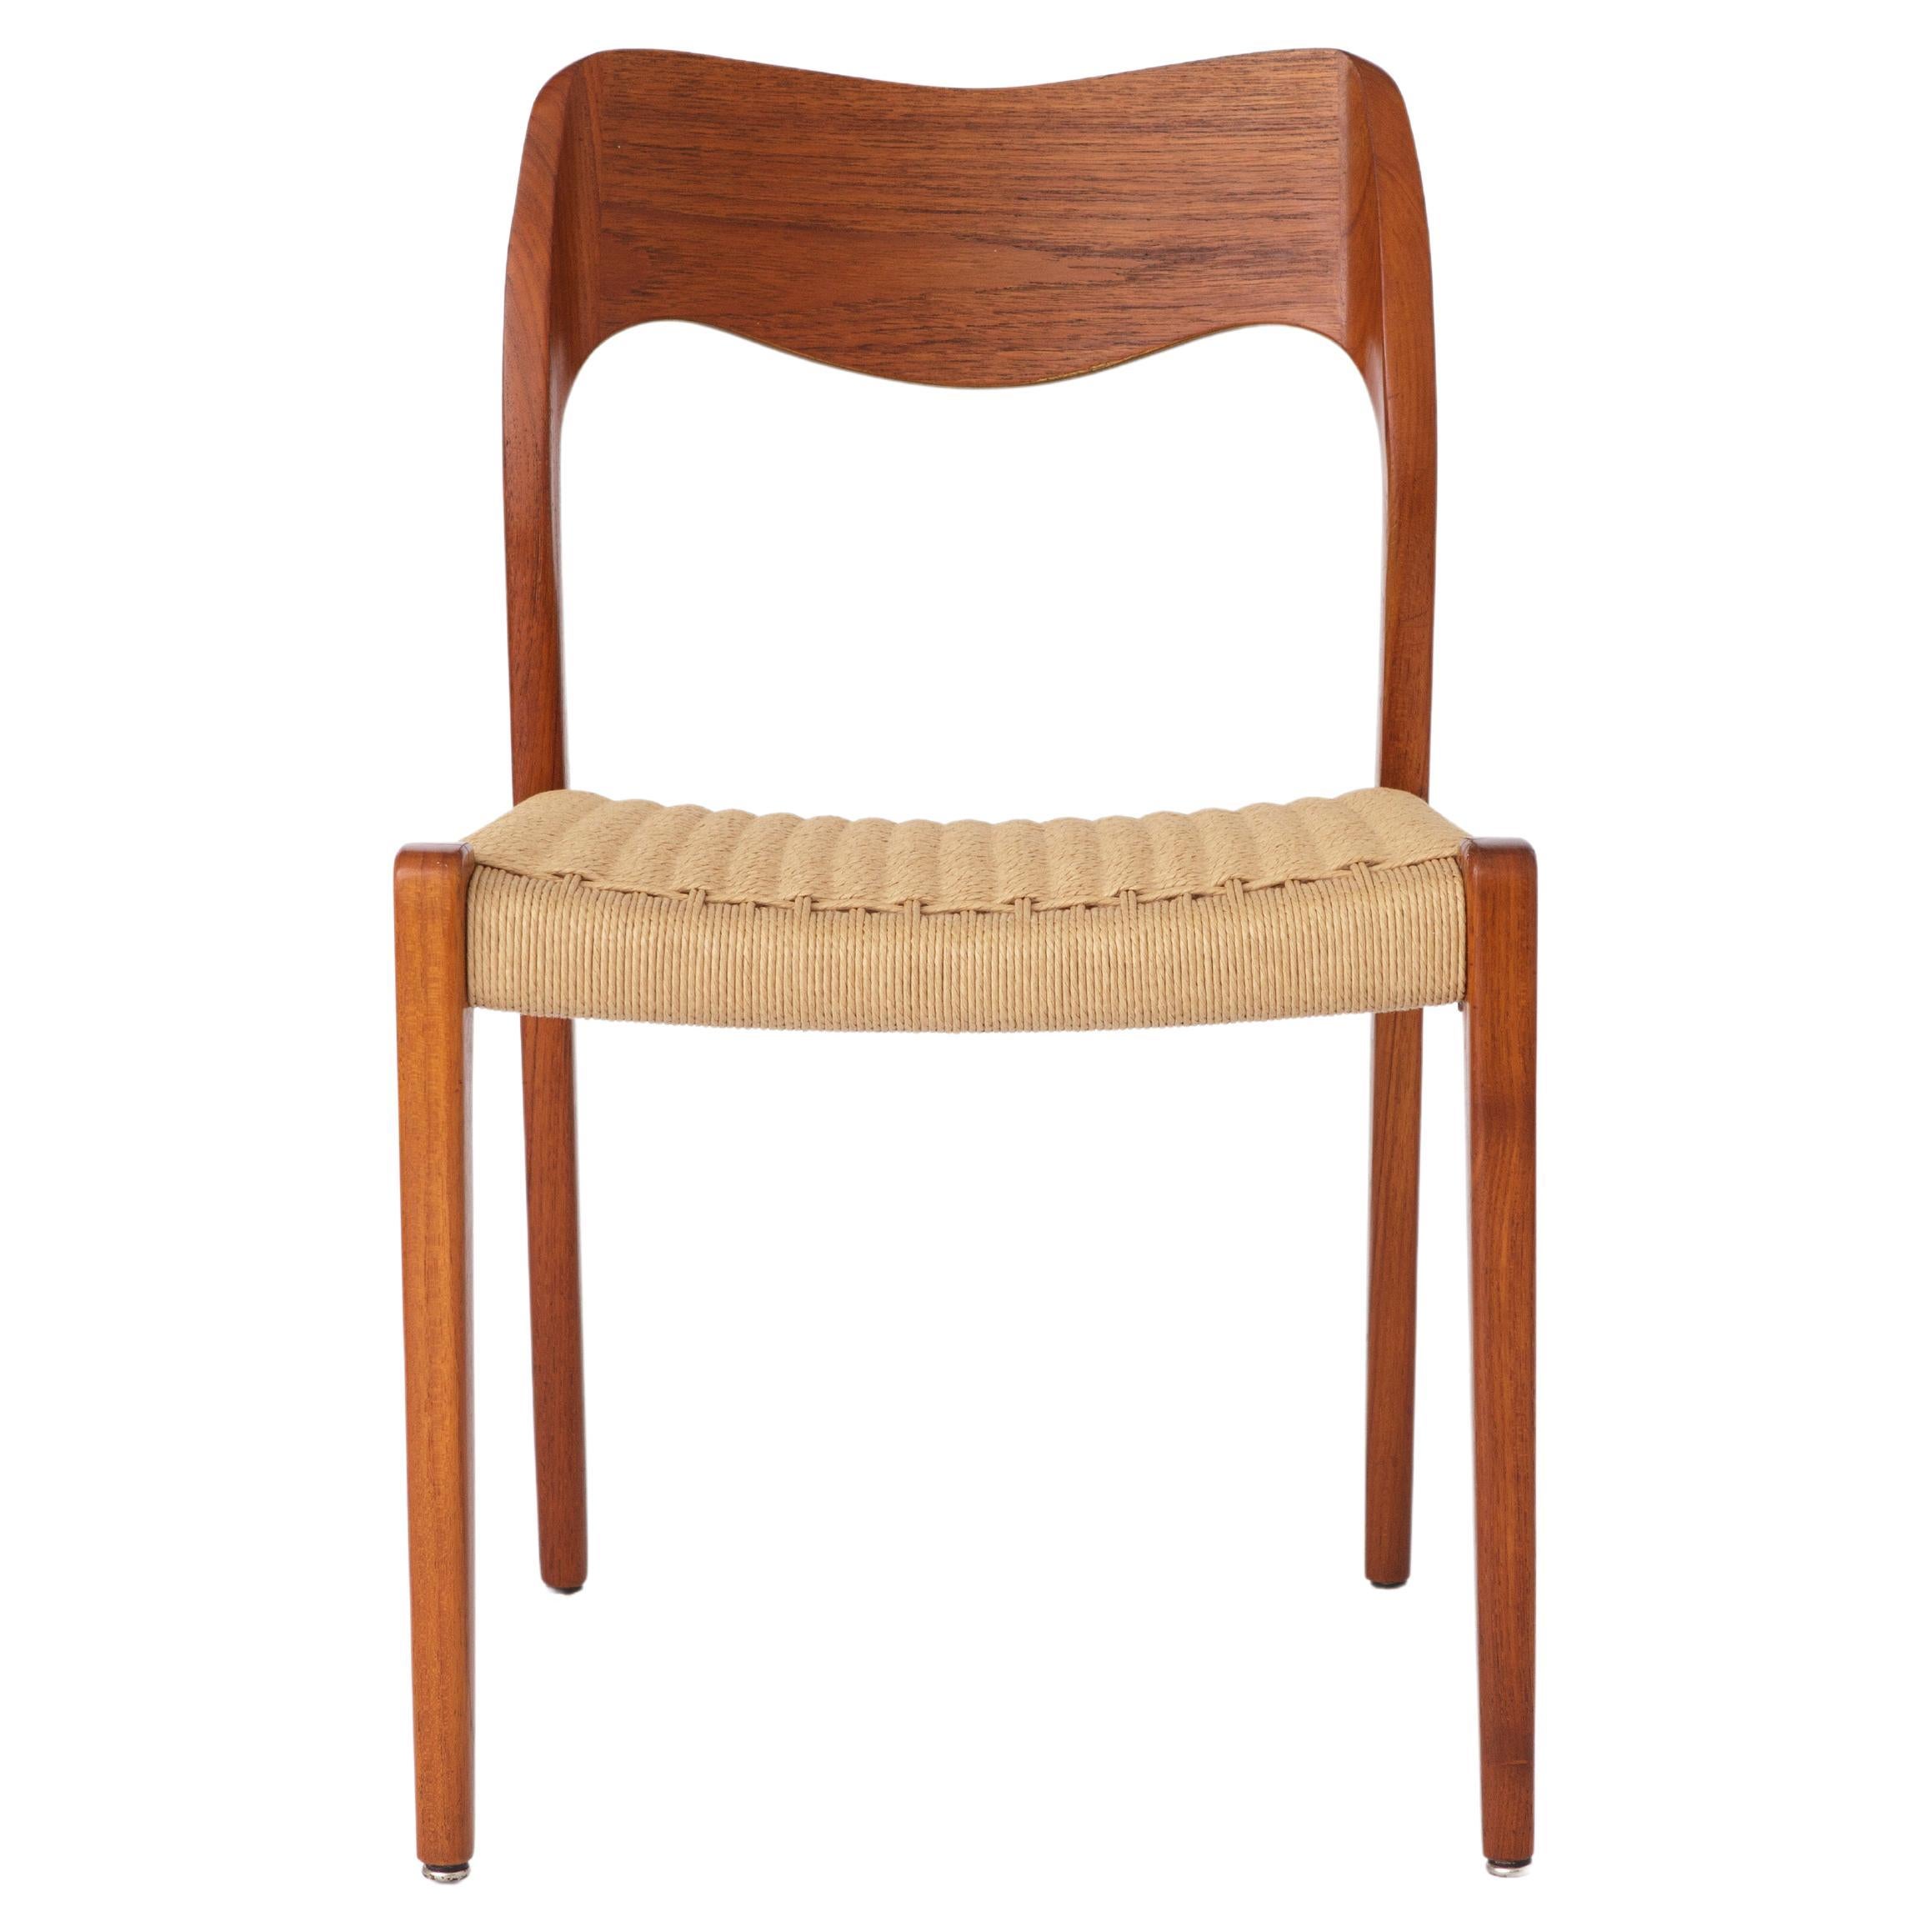 Repaired - 1 of 2 Niels Moller Chairs, model 71, Teak, 1950s, Vintage For Sale